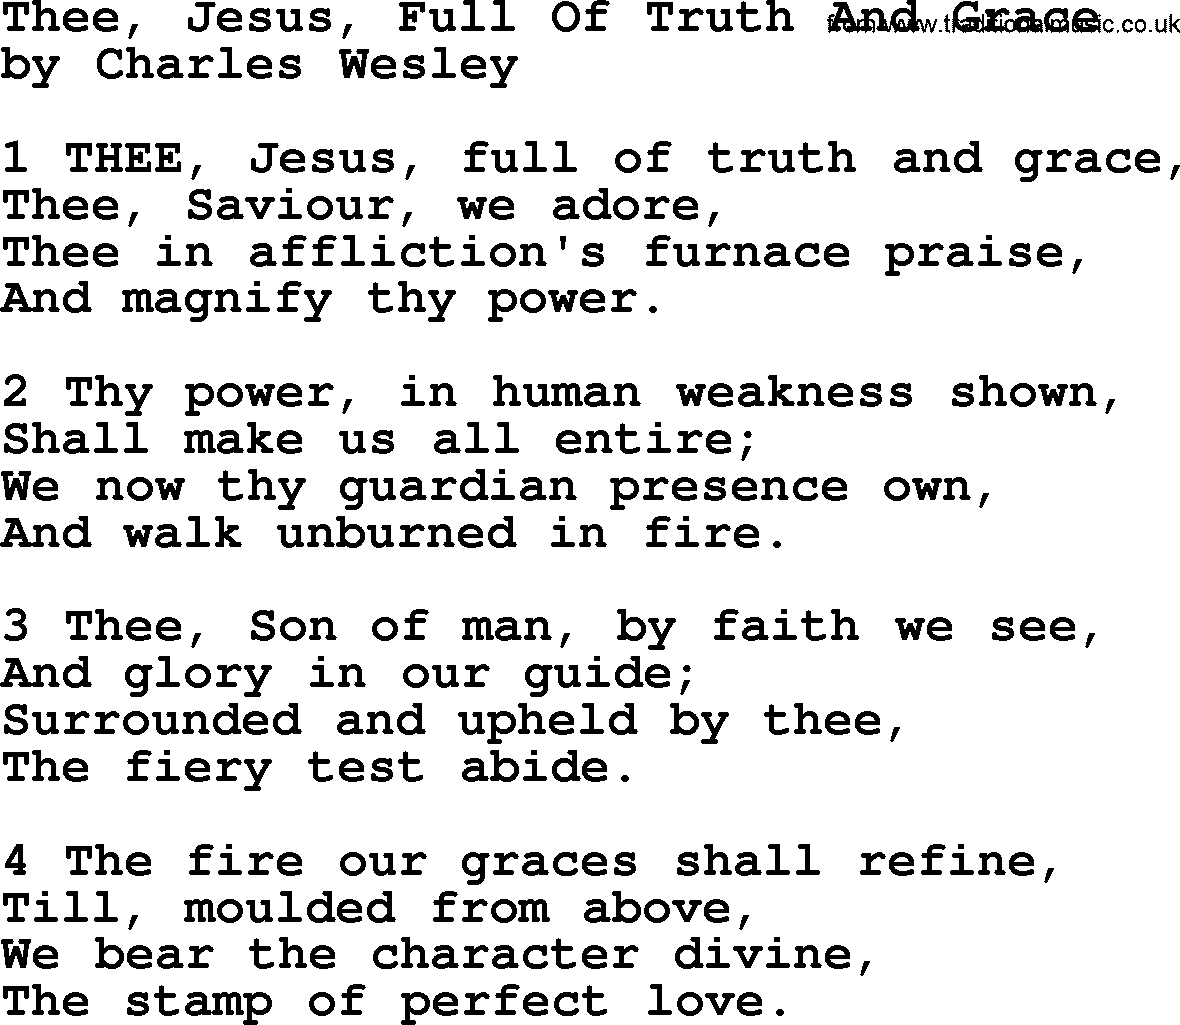 Charles Wesley hymn: Thee, Jesus, Full Of Truth And Grace, lyrics